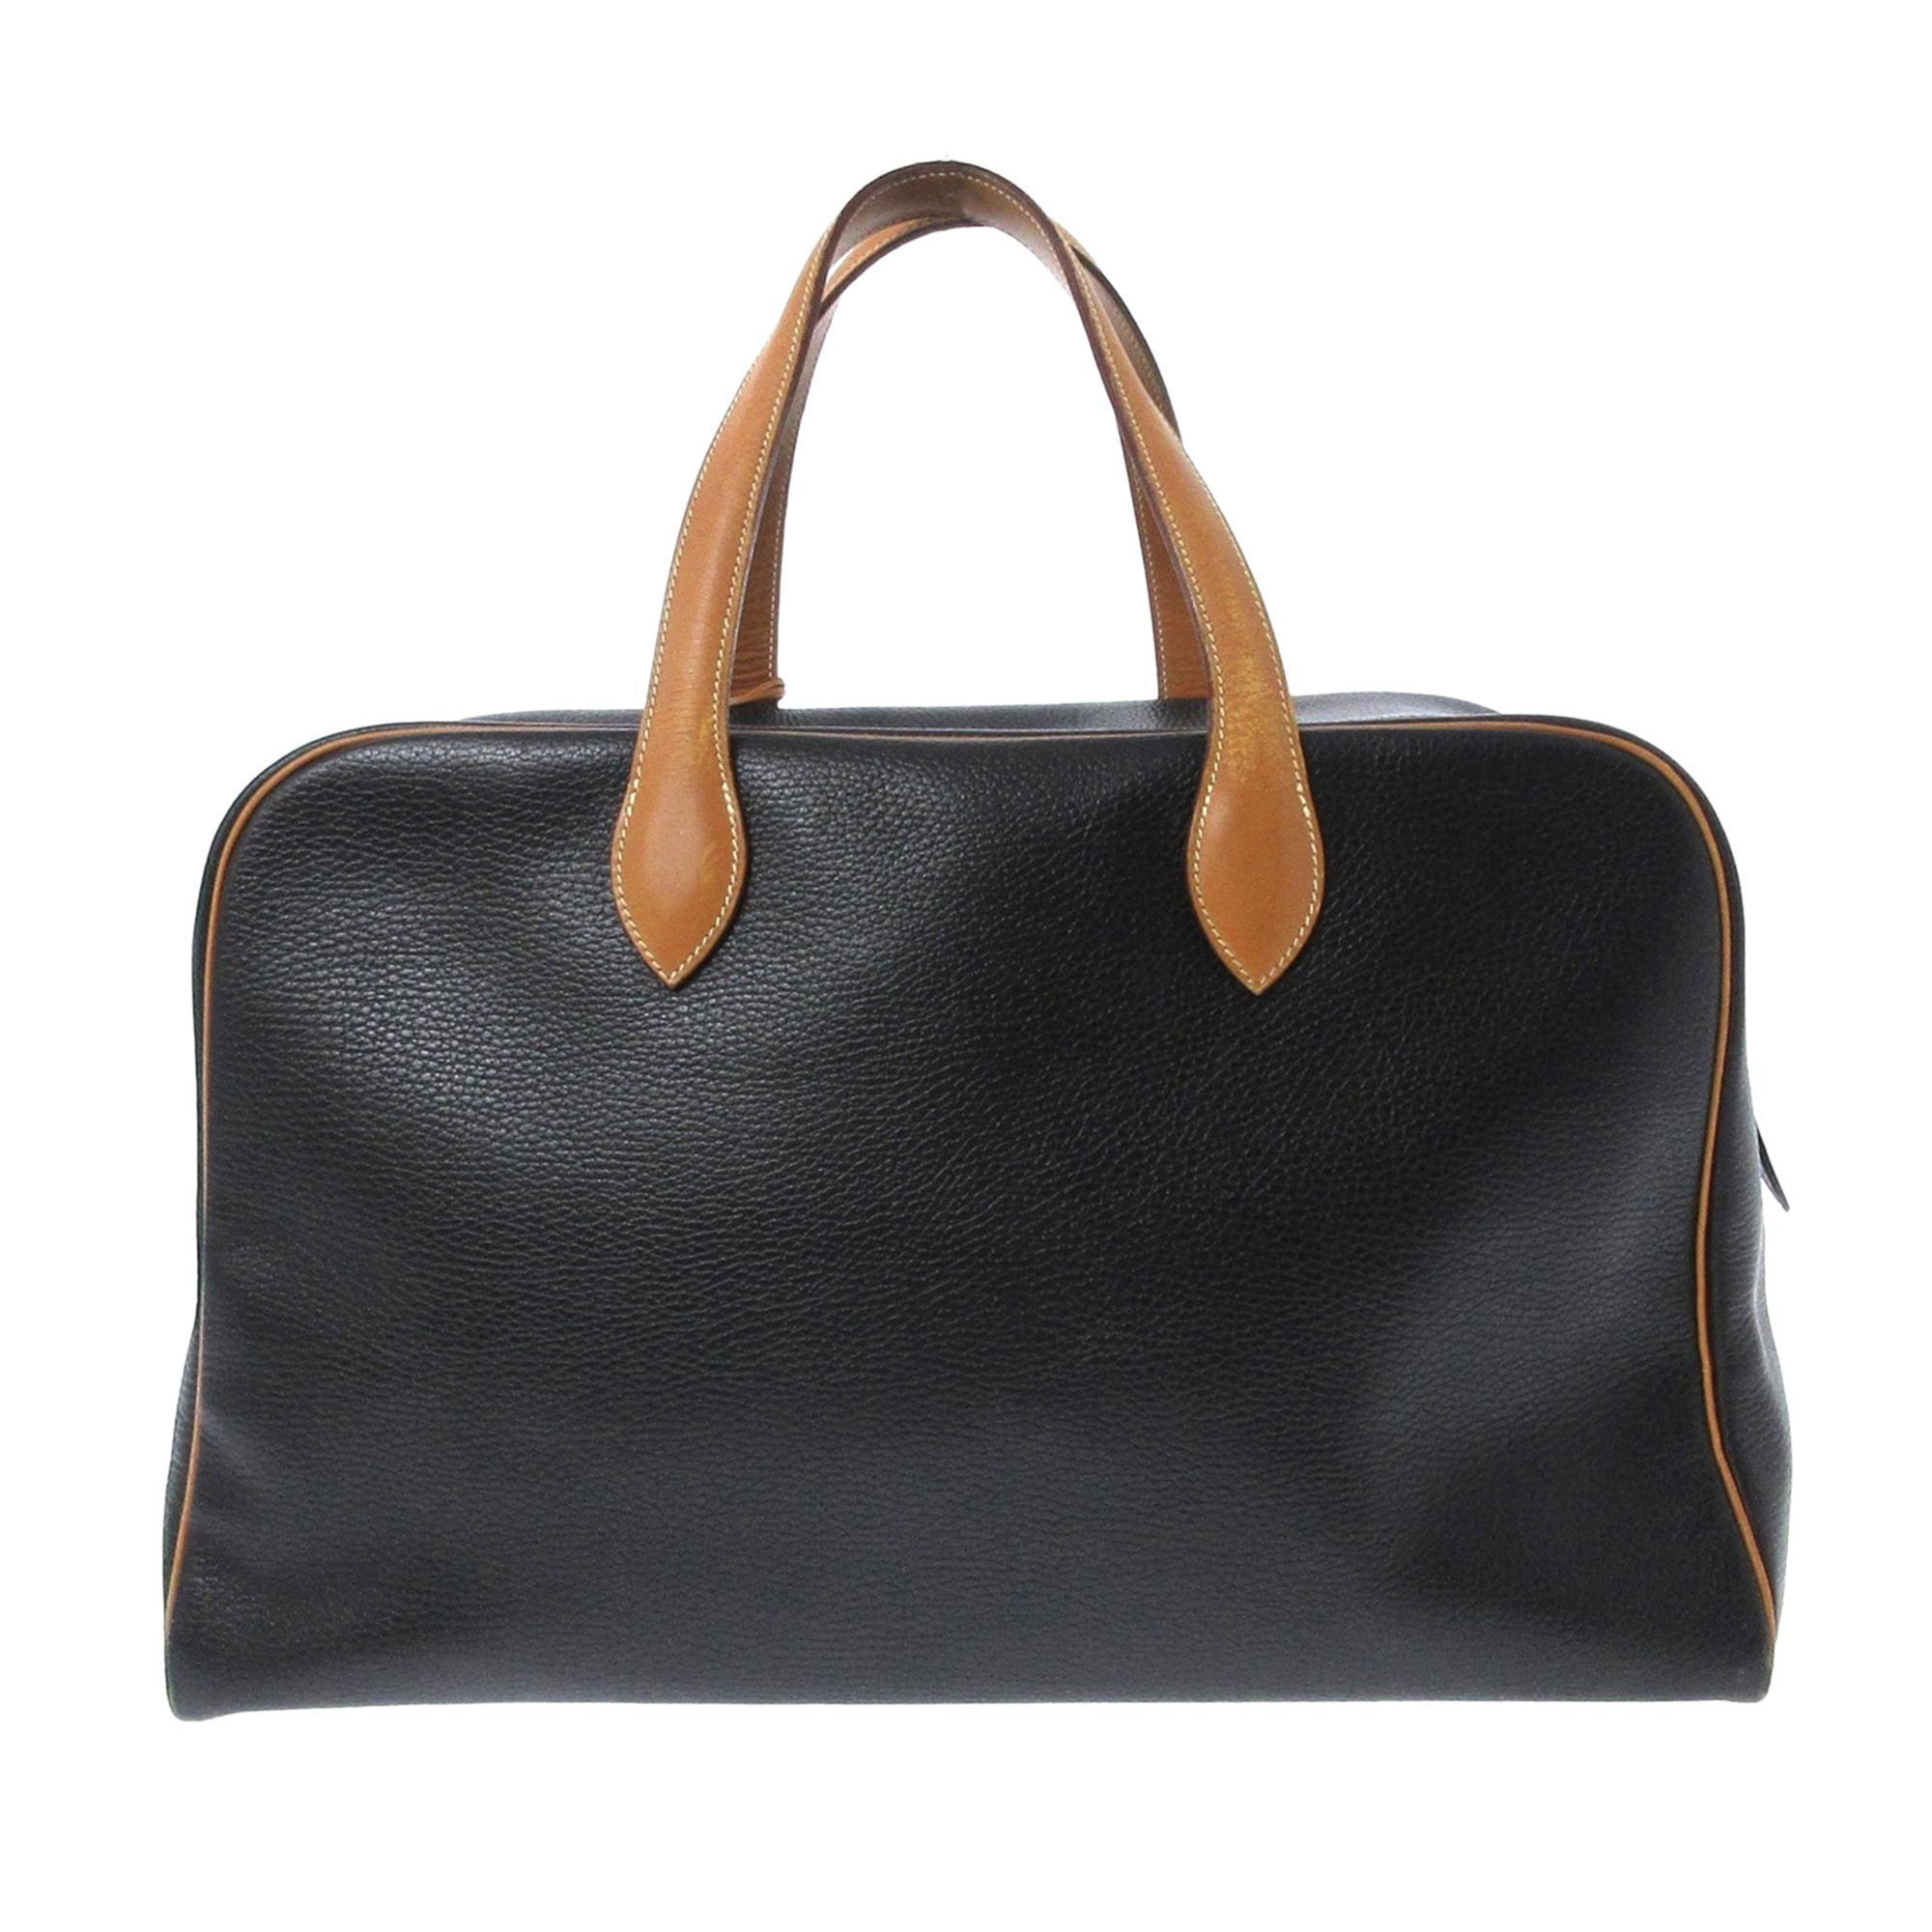 Victoria 43

The Victoria travel bag features a leather body, dual leather handles, top zip closures.

Signs of use in the corner and handles but noting major.

packaging: none
Shipping costs included in the price but for orders outside the European